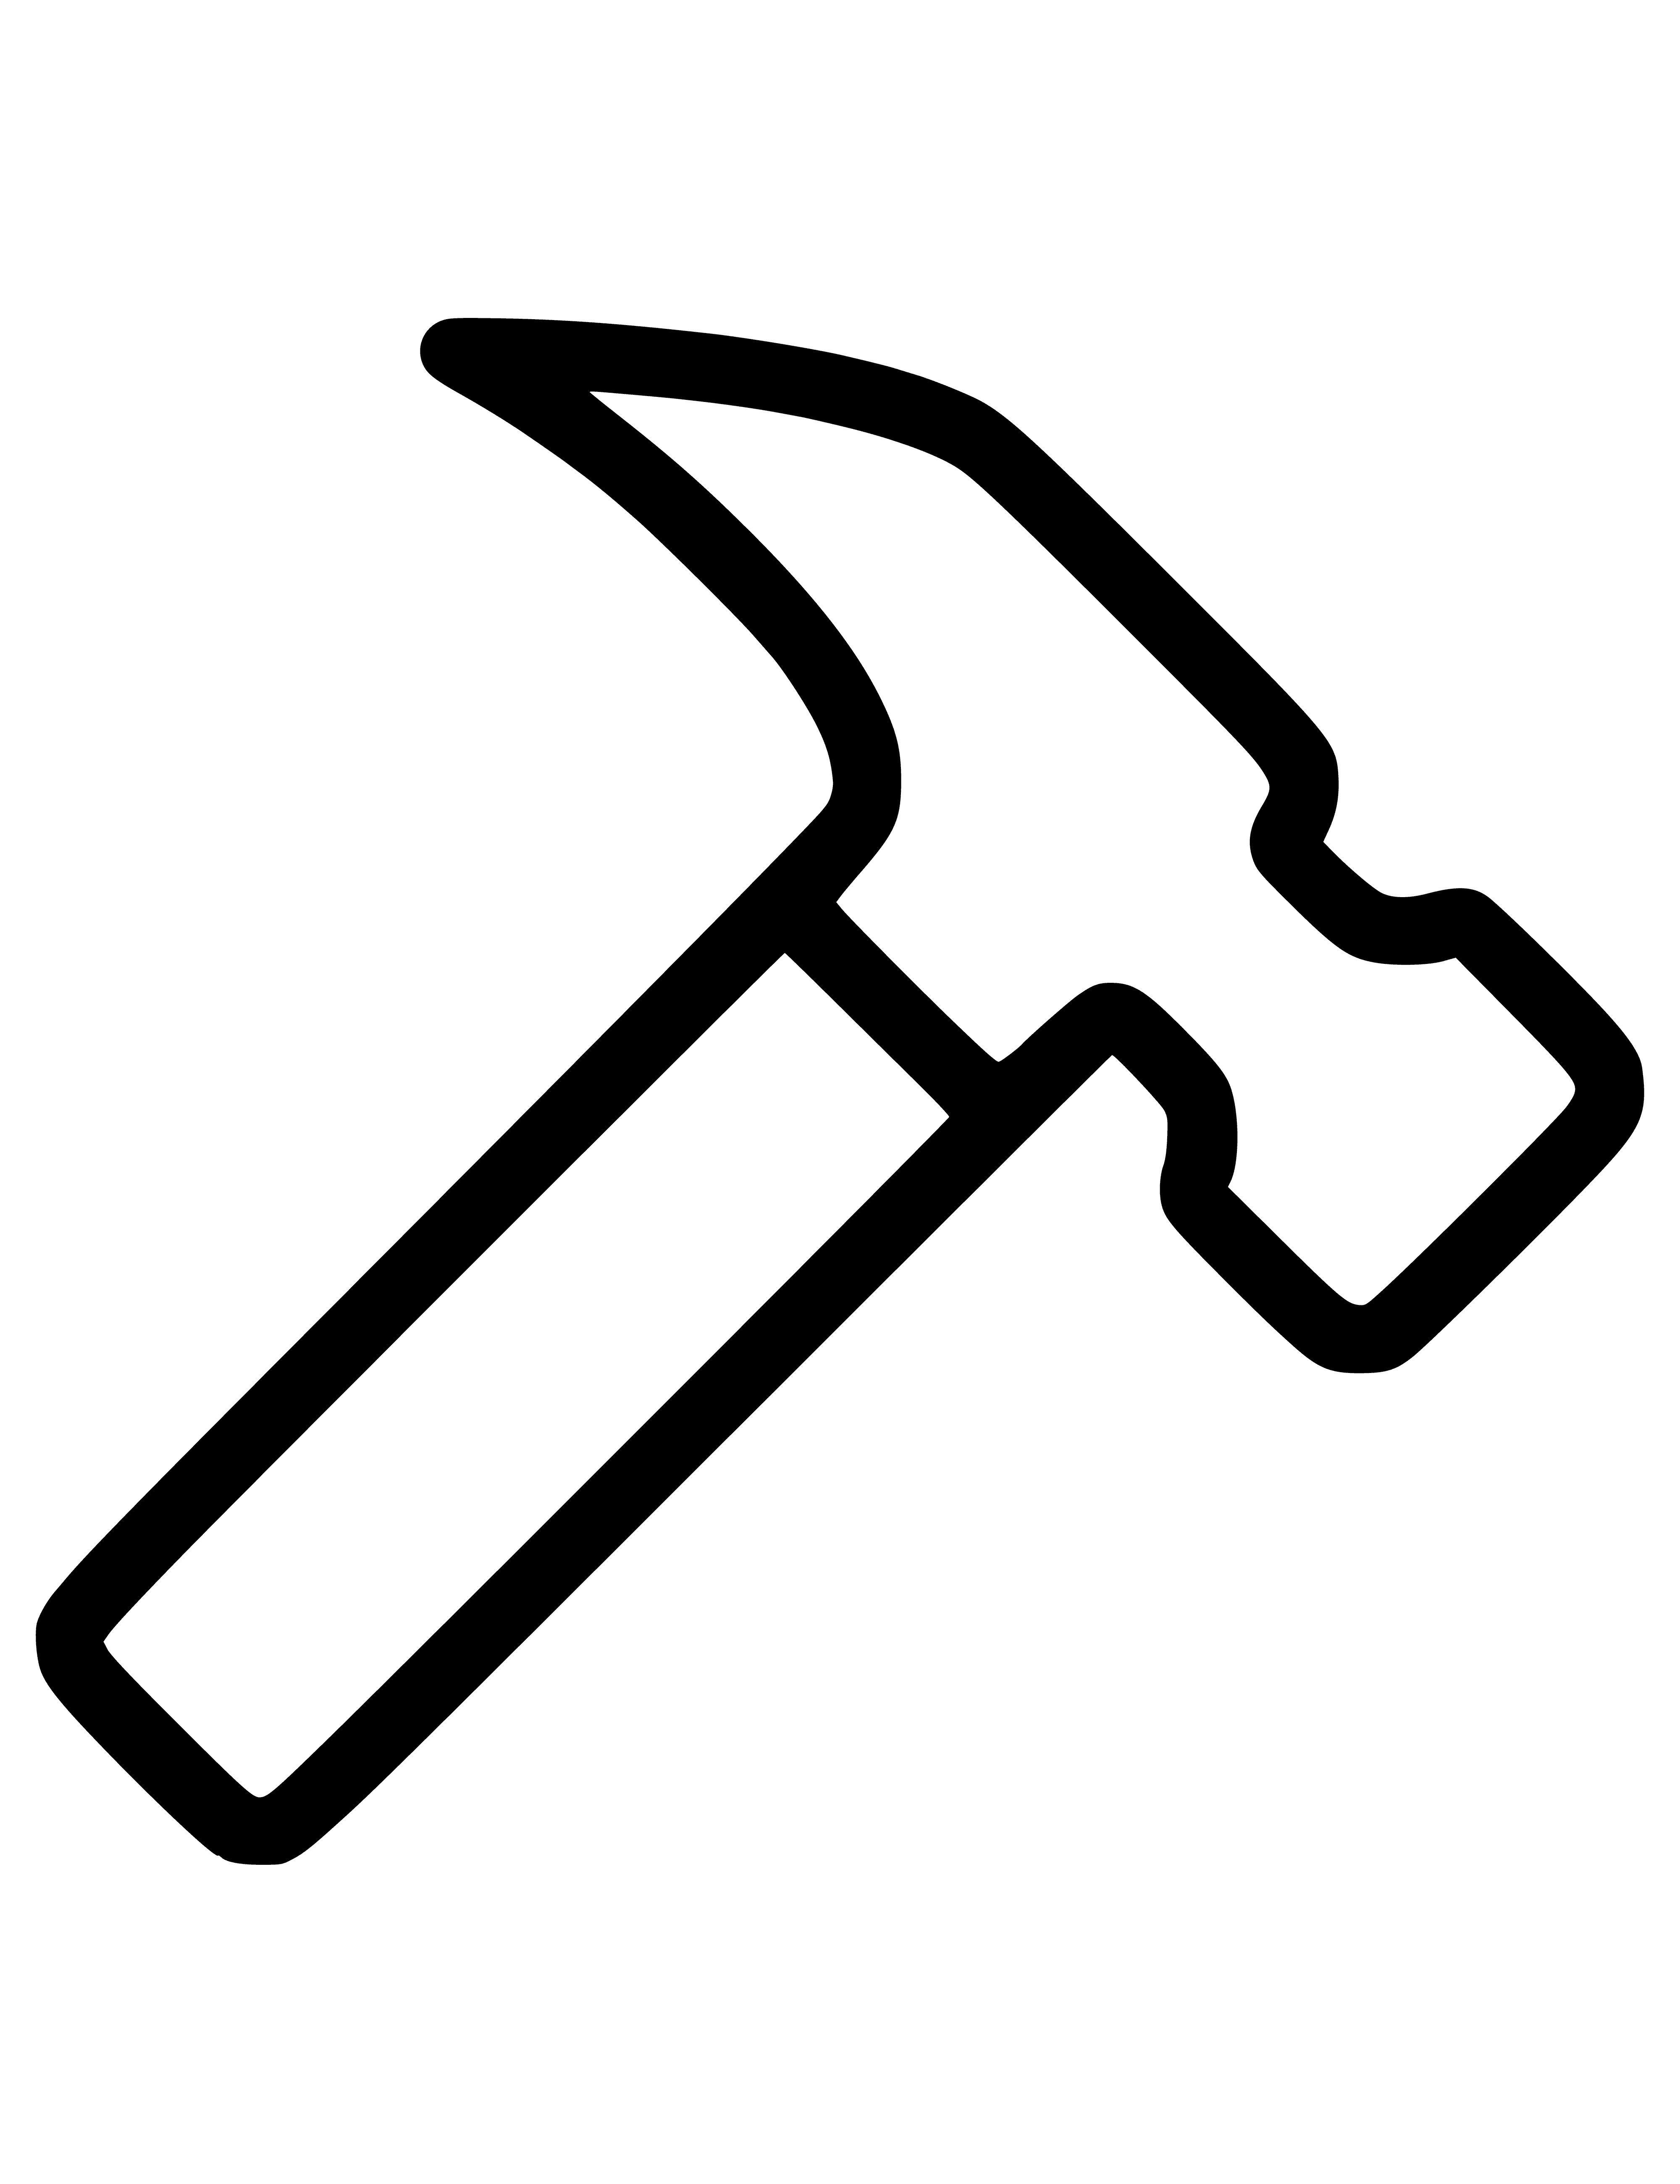 coloring page: Hammer tool: handle (wood/metal), head (metal), flat head (hammer), rounded face (face). Used to hit things.